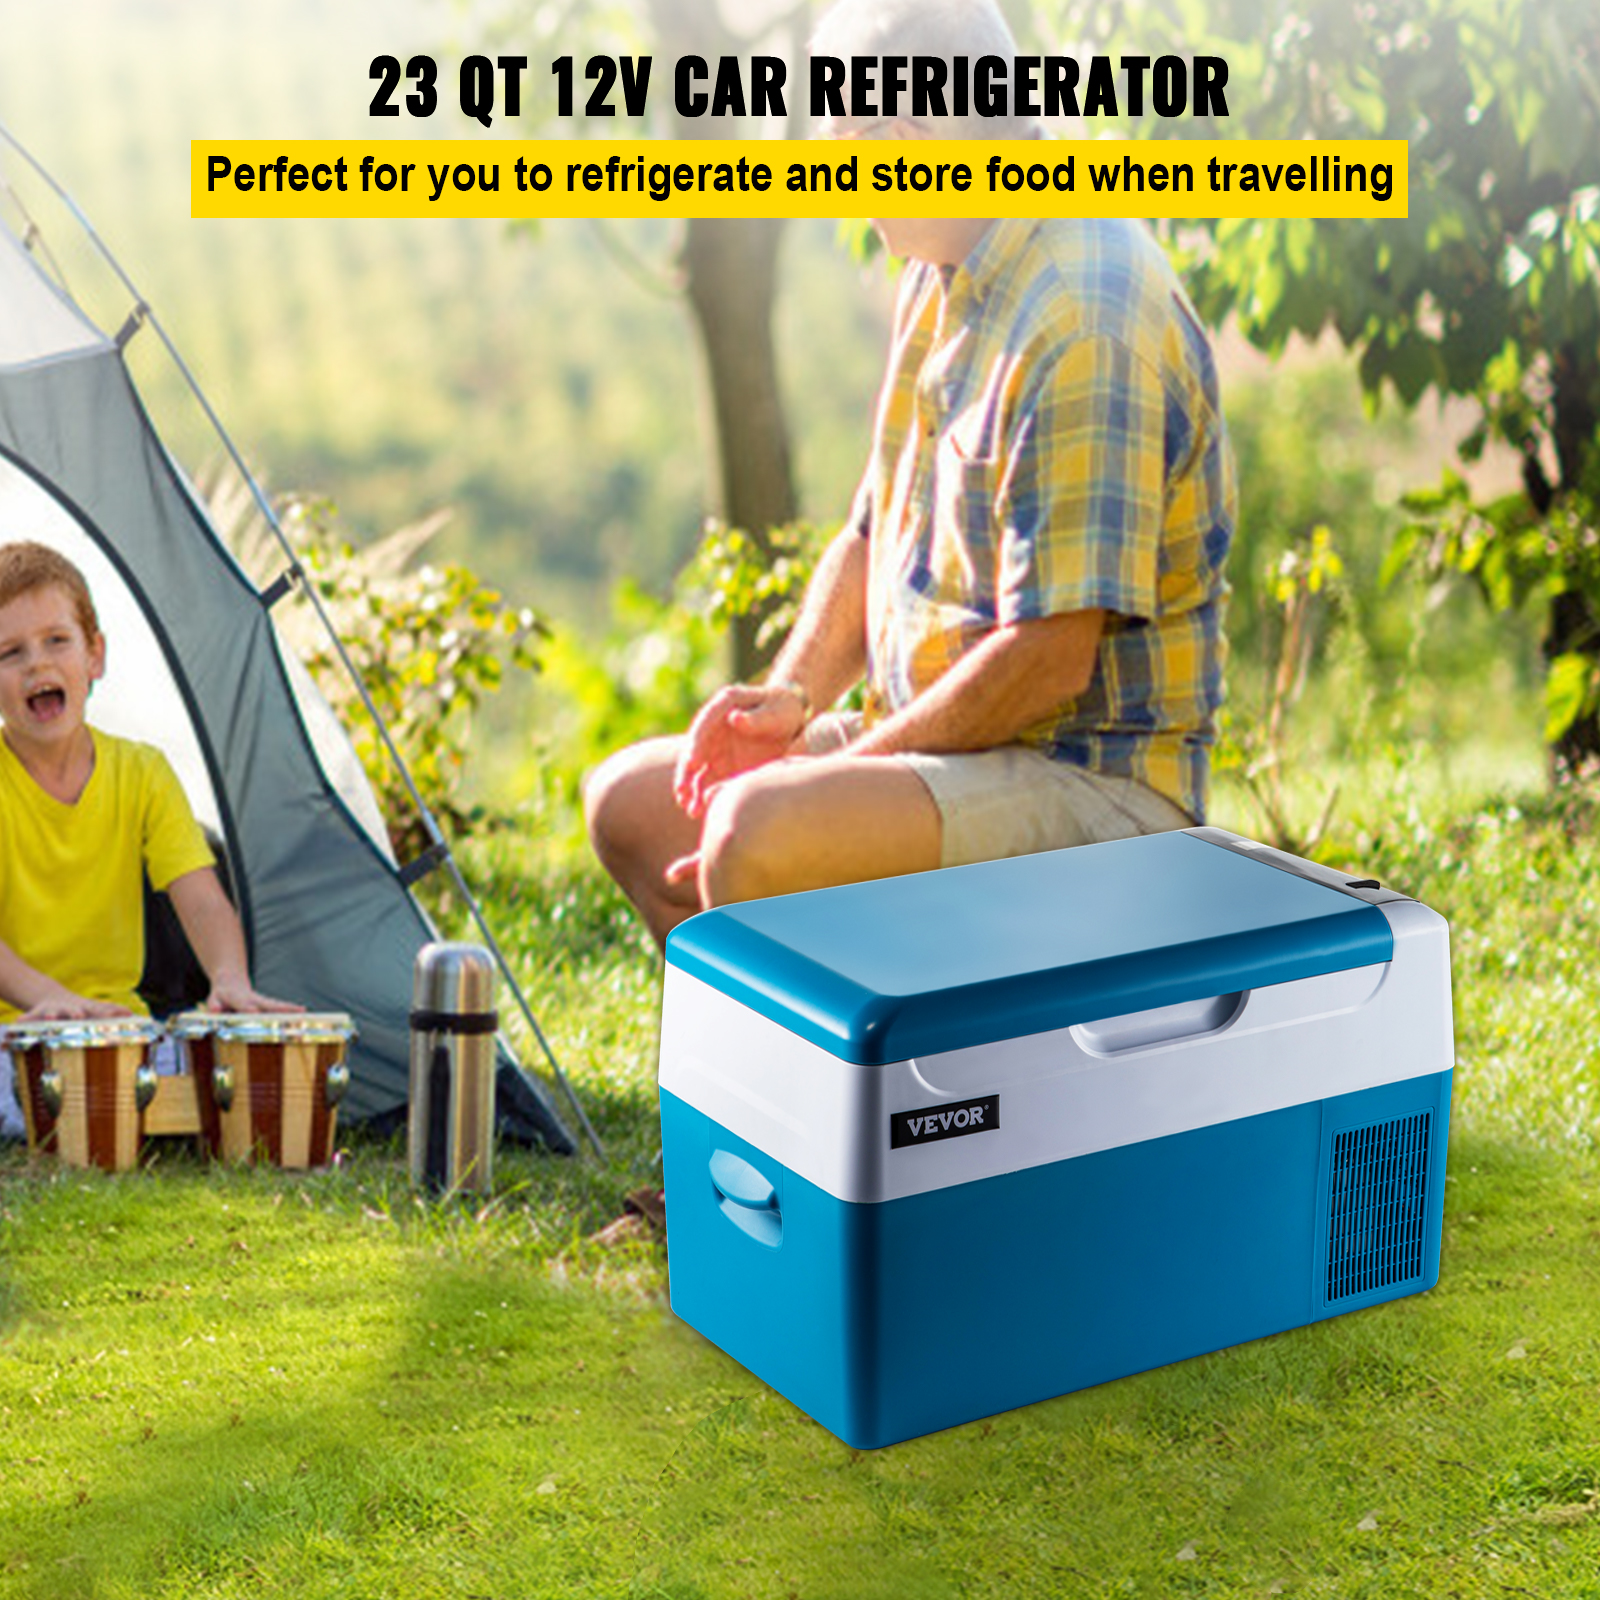 VEVOR 22L Portable Car Refrigerator, 23 Quart RV Fridge, 12/24V DC & 110-240V AC Vehicle Car Truck Boat Mini Electric Cooler for Driving Travel Fishing Outdoor and Home Use - image 3 of 10